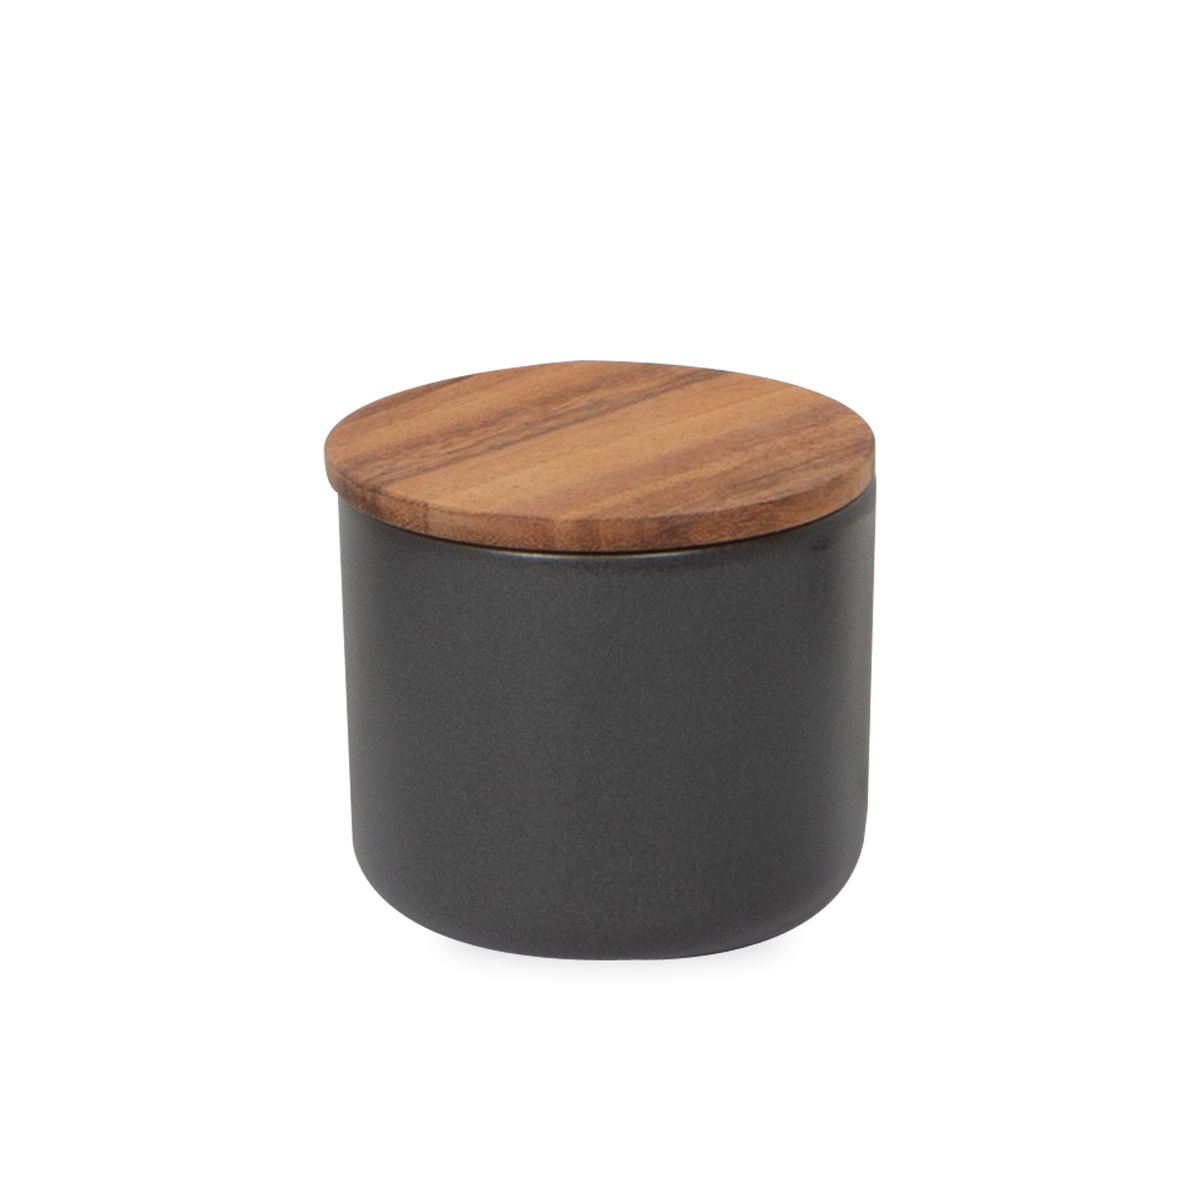 These Stoneware Acacia Canisters are handmade in Thailand and feature a ceramic body with an acacia wood lid to keep contents fresh and secure.